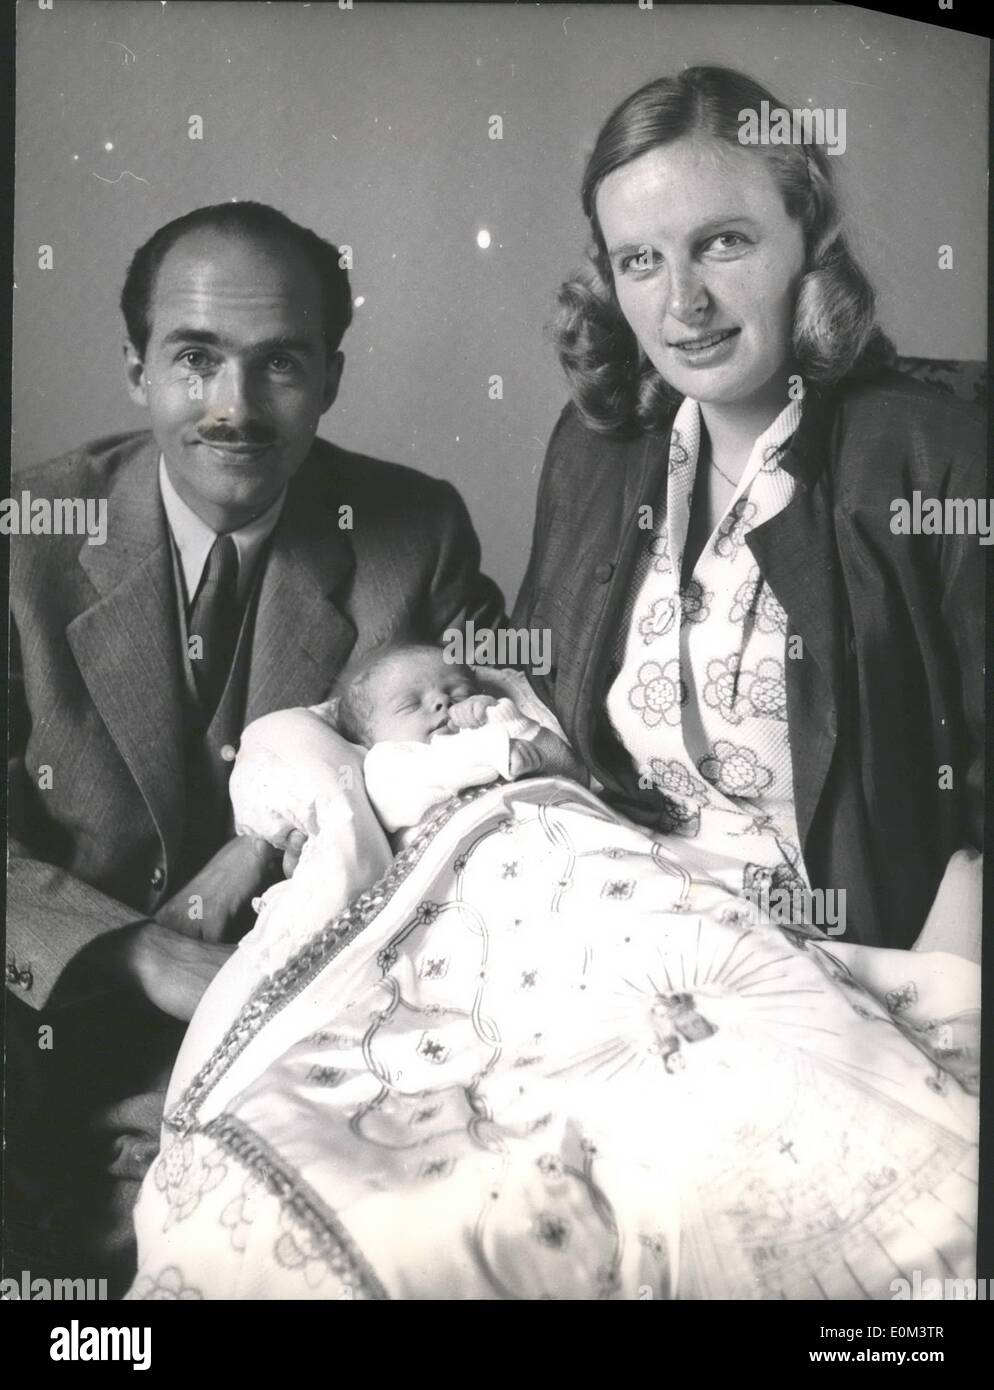 Jun. 06, 1953 - First family portrait of Duke Otto Von Habsburg. photo shows The Austrian Duke Otto Von habsburg, his wife Regina, princess in of Saxony meiningen, and princess Andrea maria who was born on 30 may 1953 in wuerz burg, Germany. The royal couple is to leave wuerzburg scon. Stock Photo